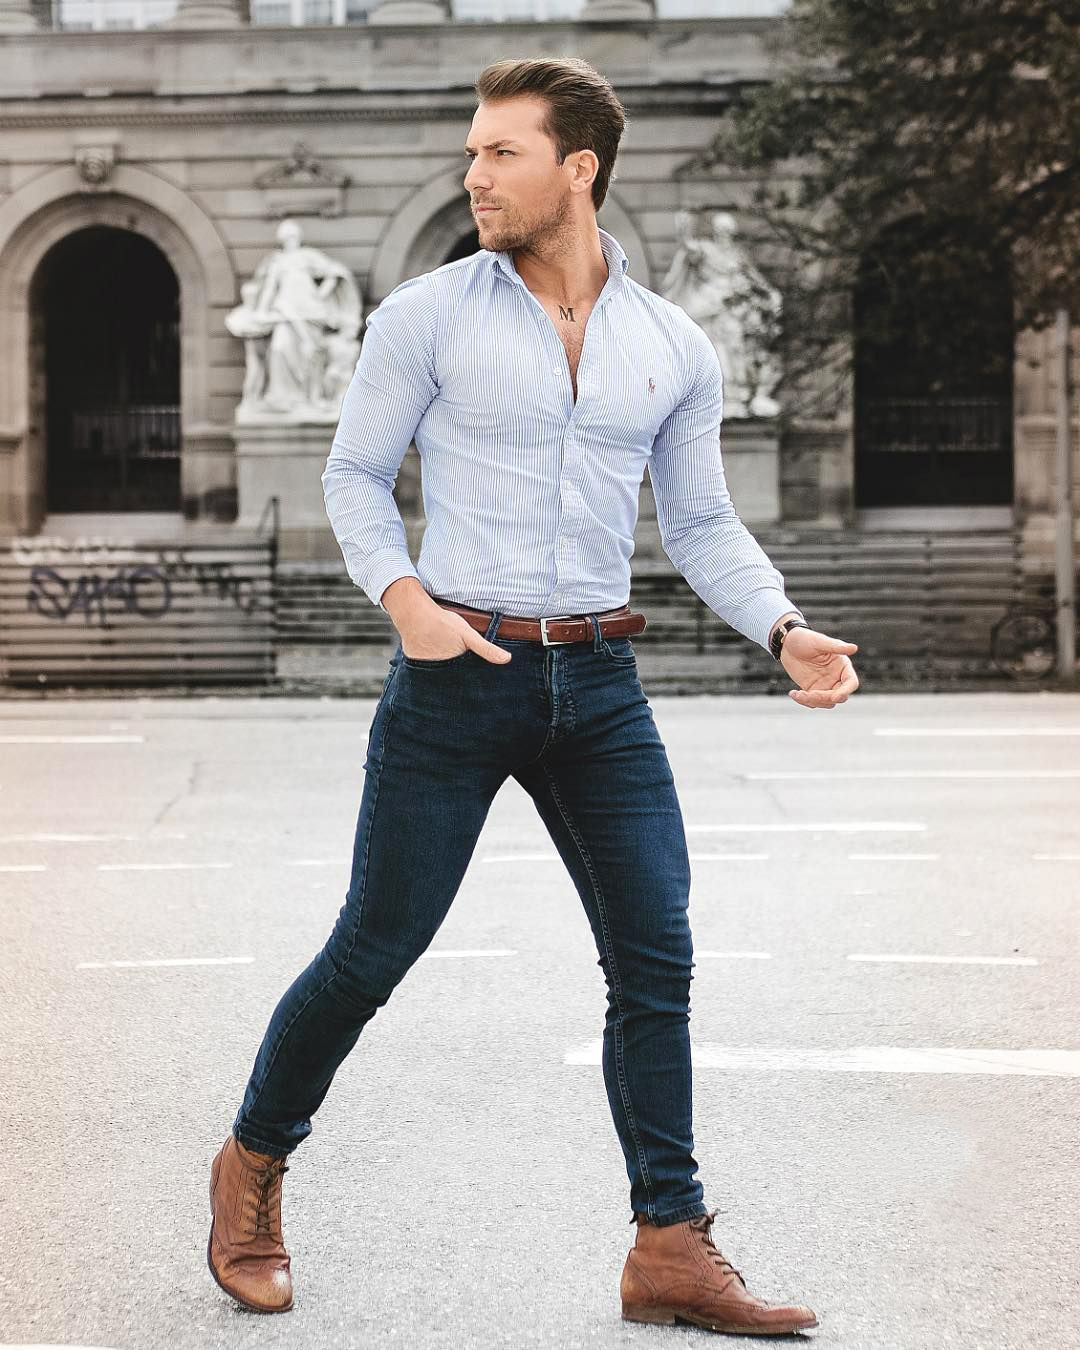 Different Ways Of Wearing Dress Shirt With Jeans Suits Expert | vlr.eng.br